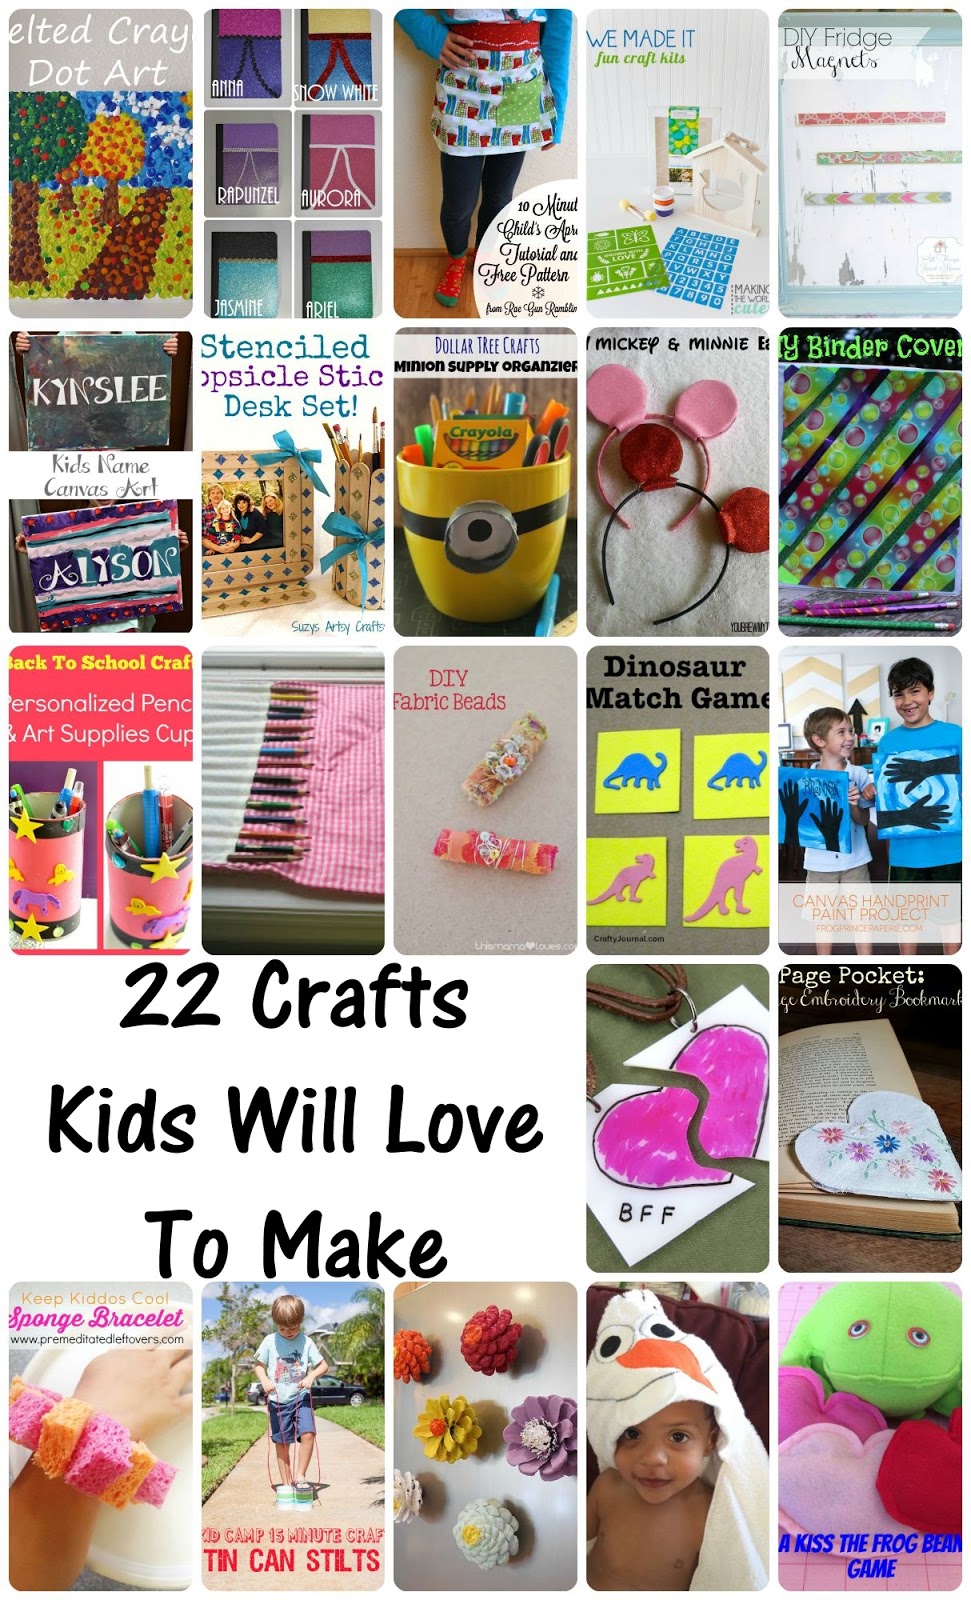 Crafts Kids Will Love. Great collection of activities to do with children